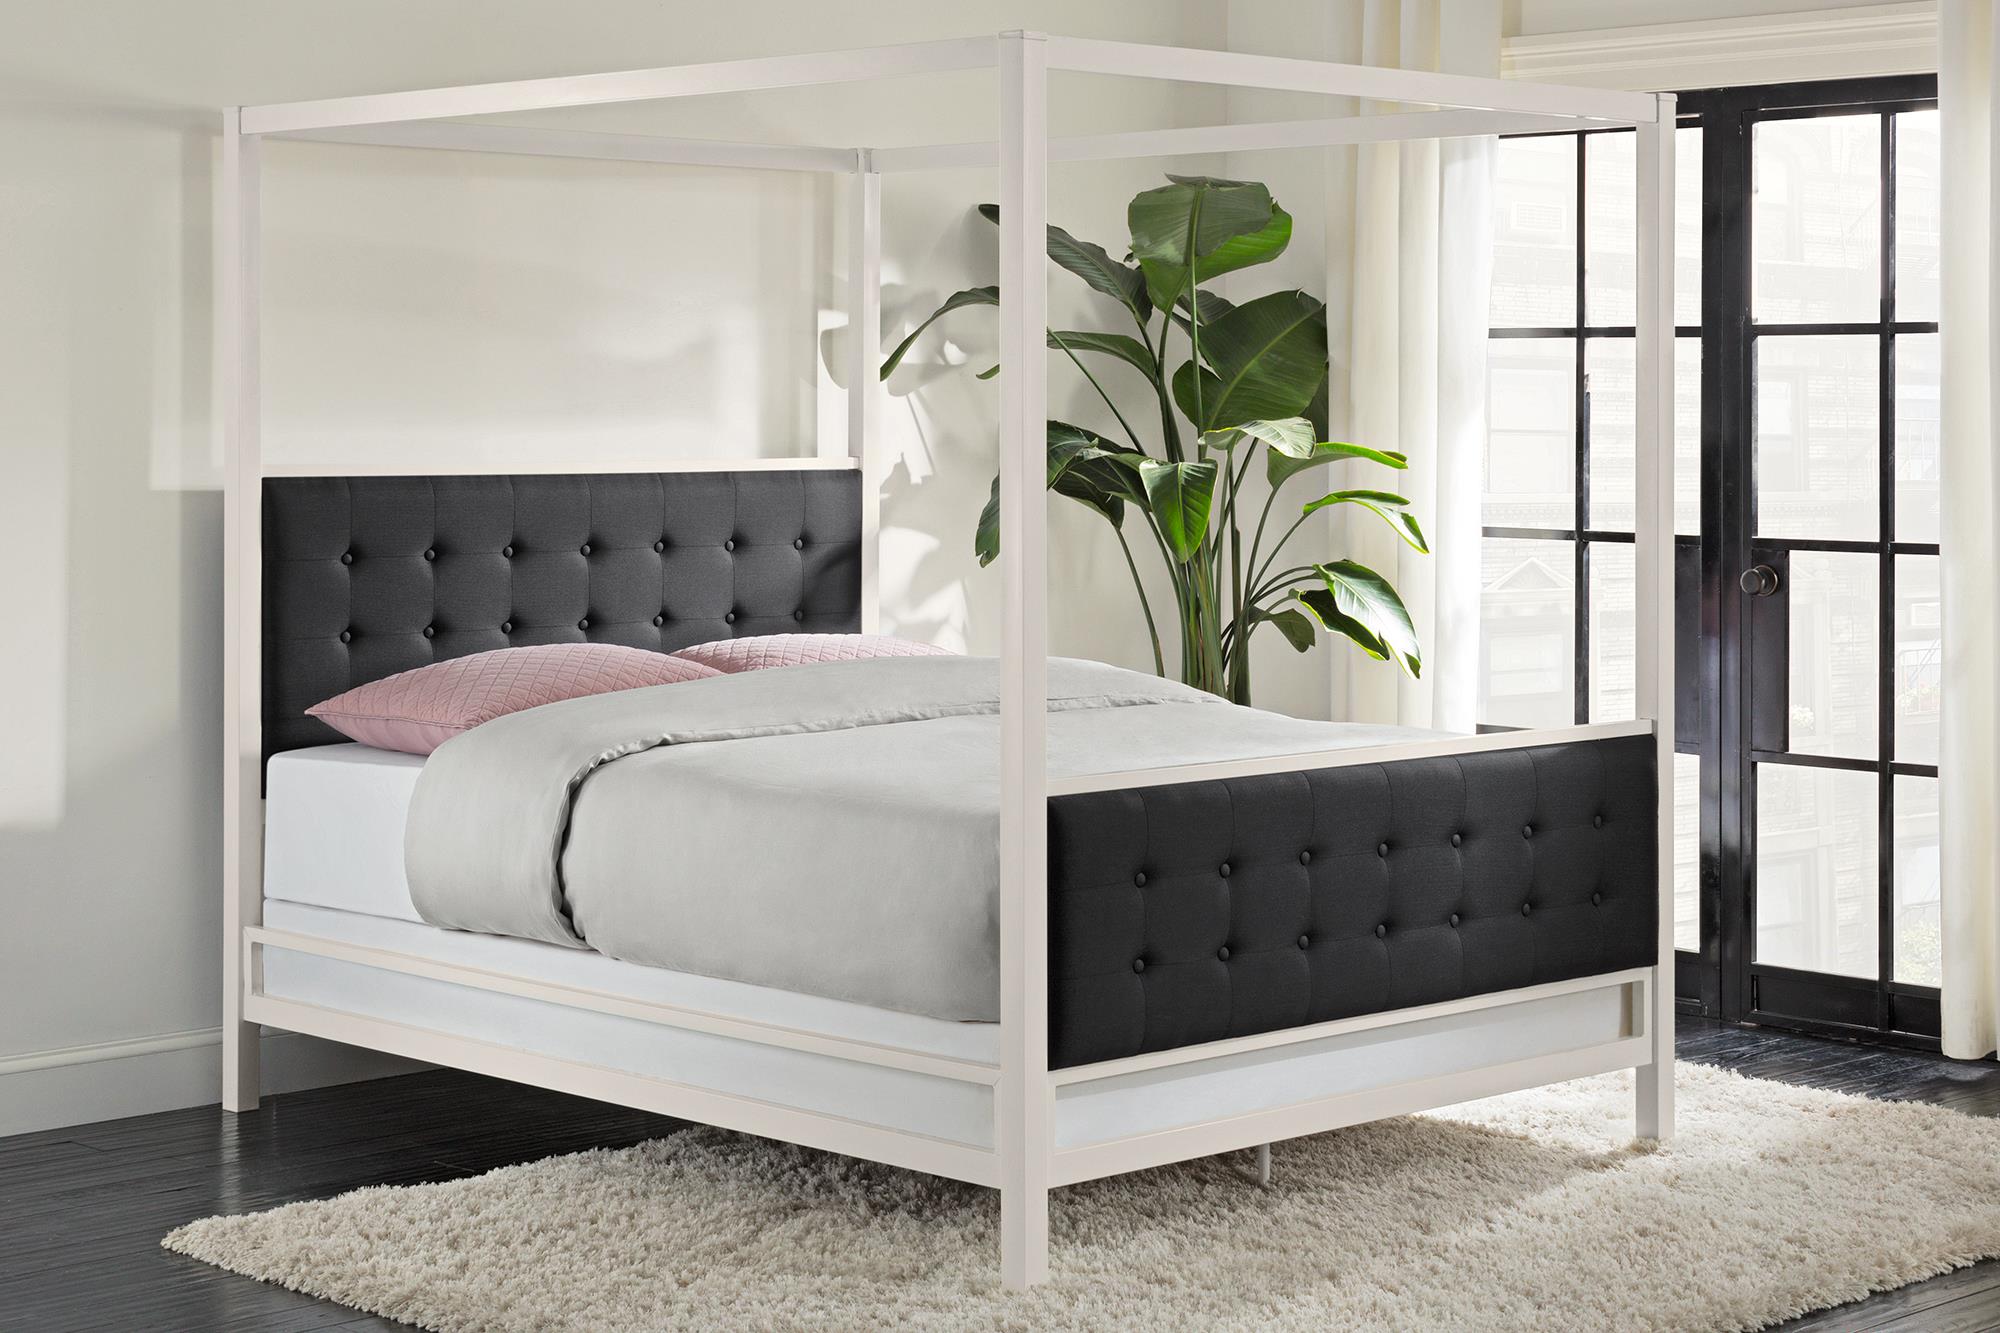 Elegant modern bedroom with a white four-poster bed, stylish black headboard, and cozy bedding, perfect for a chic HD desktop wallpaper background.